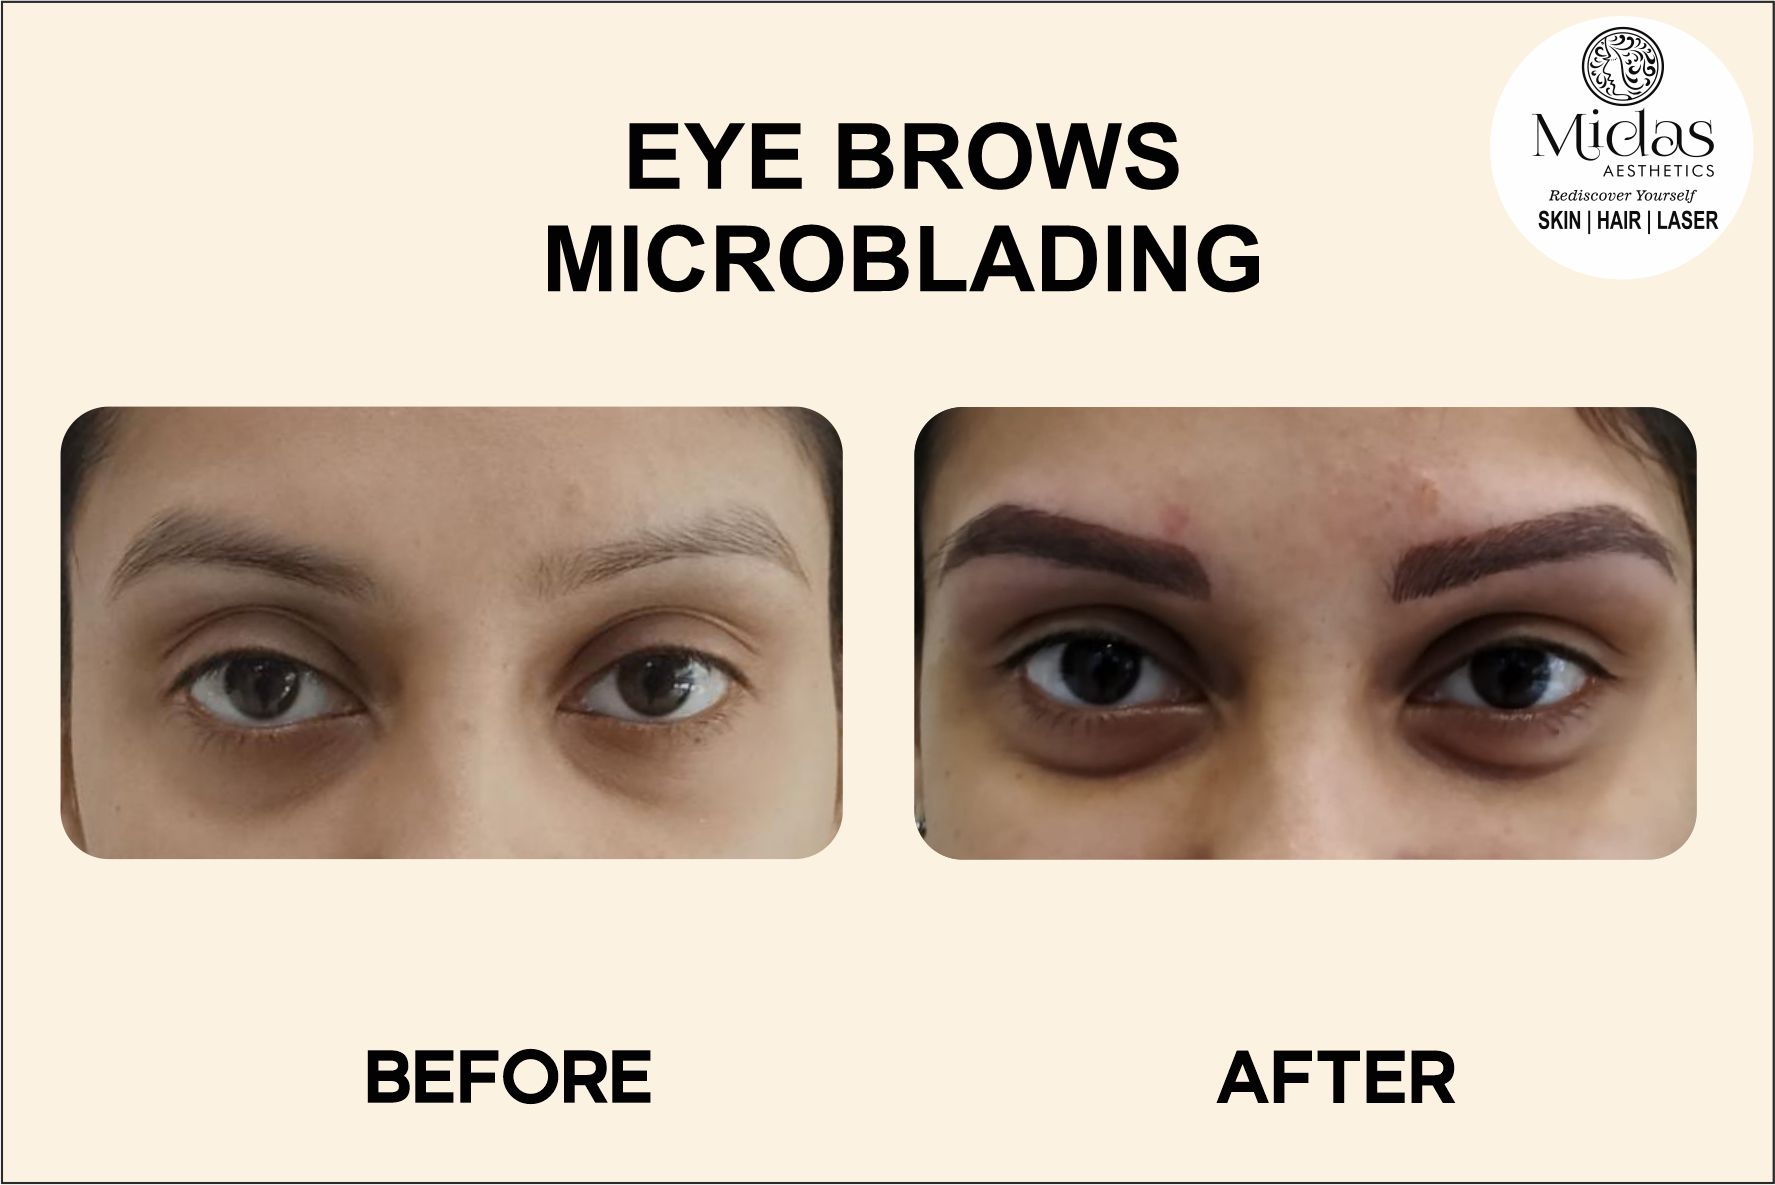 Eye brows Microblading, before and after images